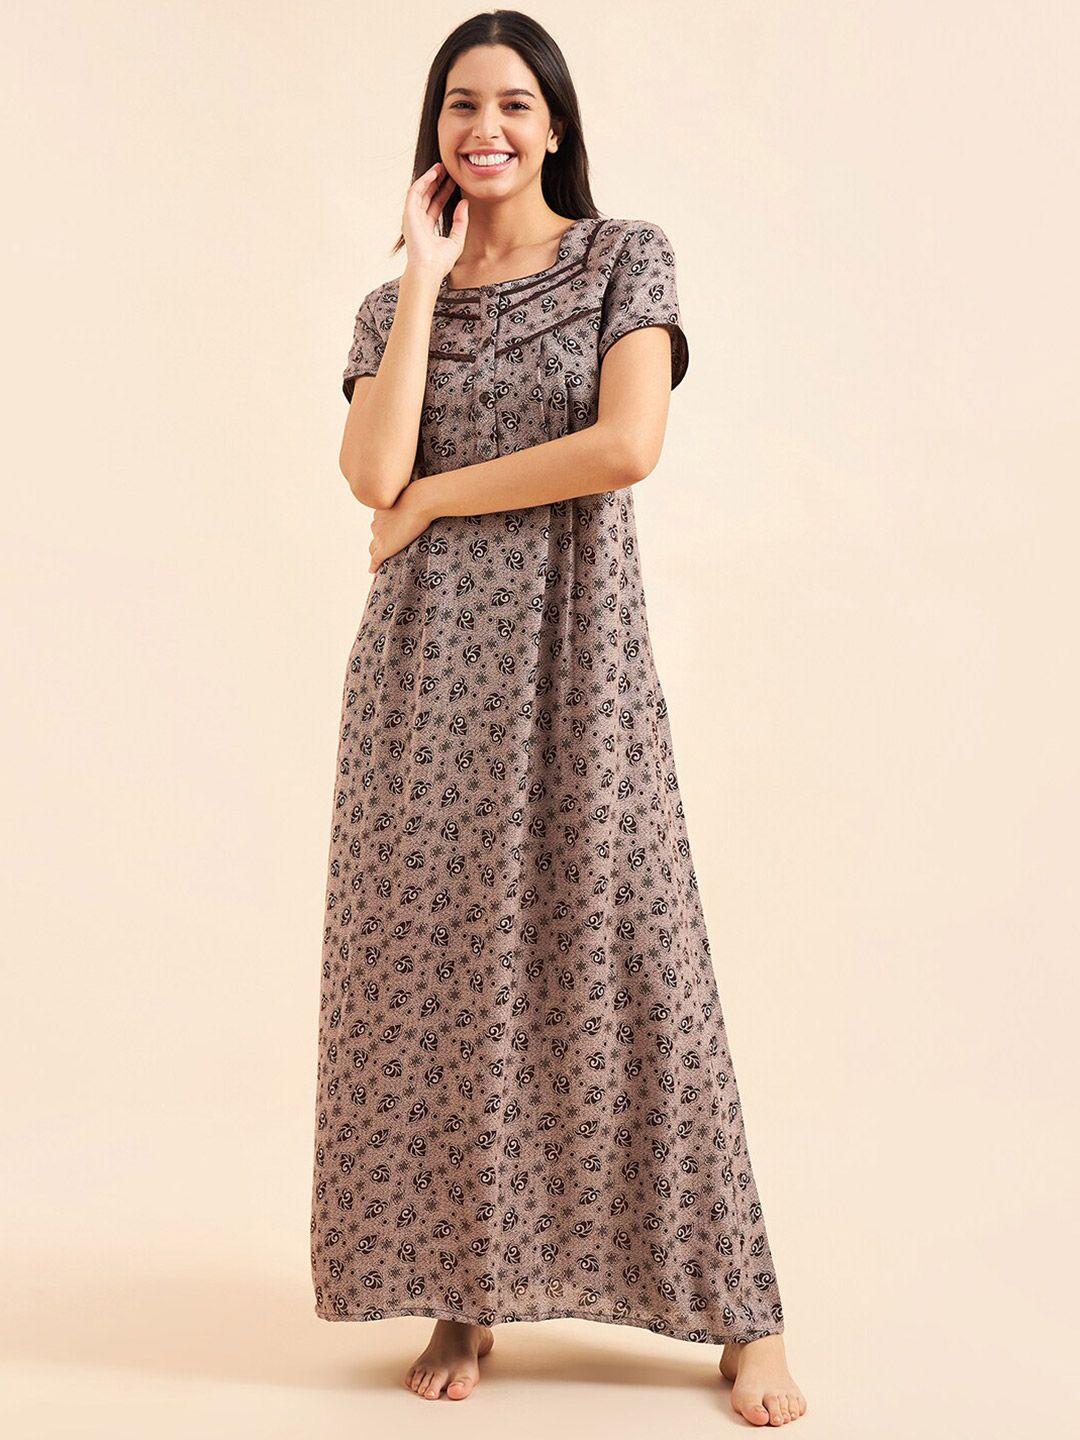 sweet-dreams-brown-&-beige-ethnic-motifs-printed-maxi-pure-cotton-nightdress